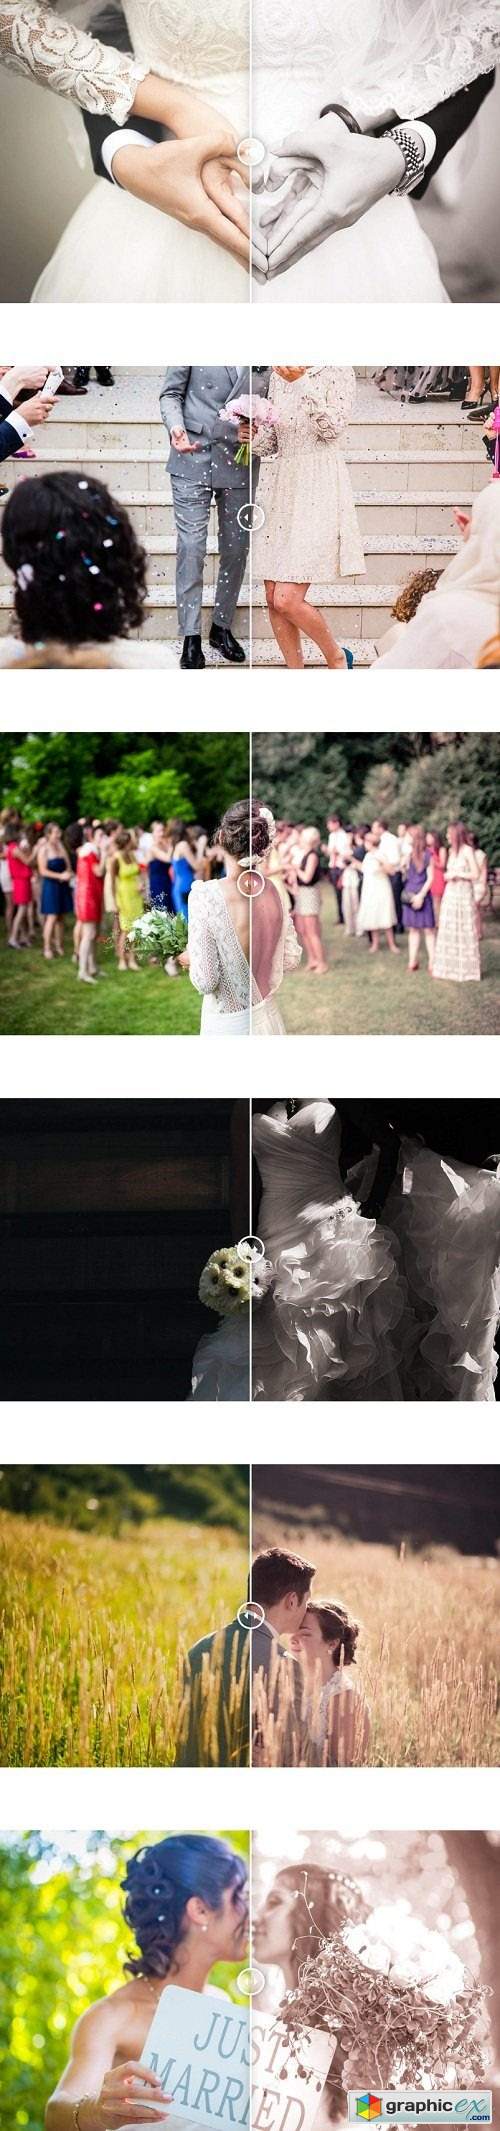 Photonify - Wedding Collection Lightroom Presets